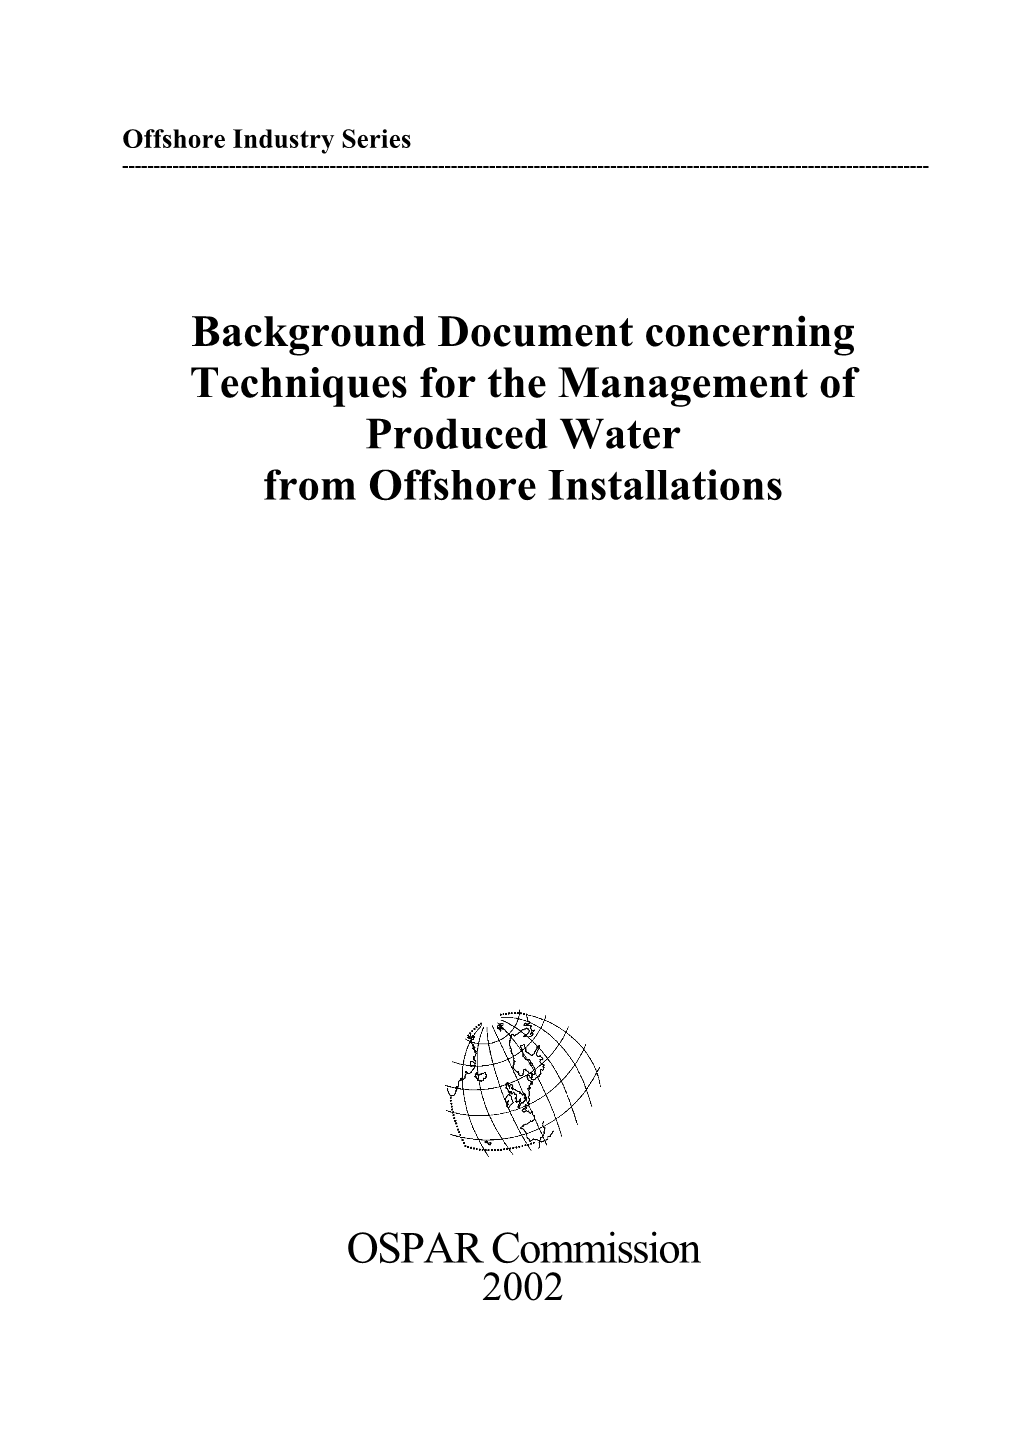 Background Document Concerning Techniques for the Management of Produced Water from Offshore Installations